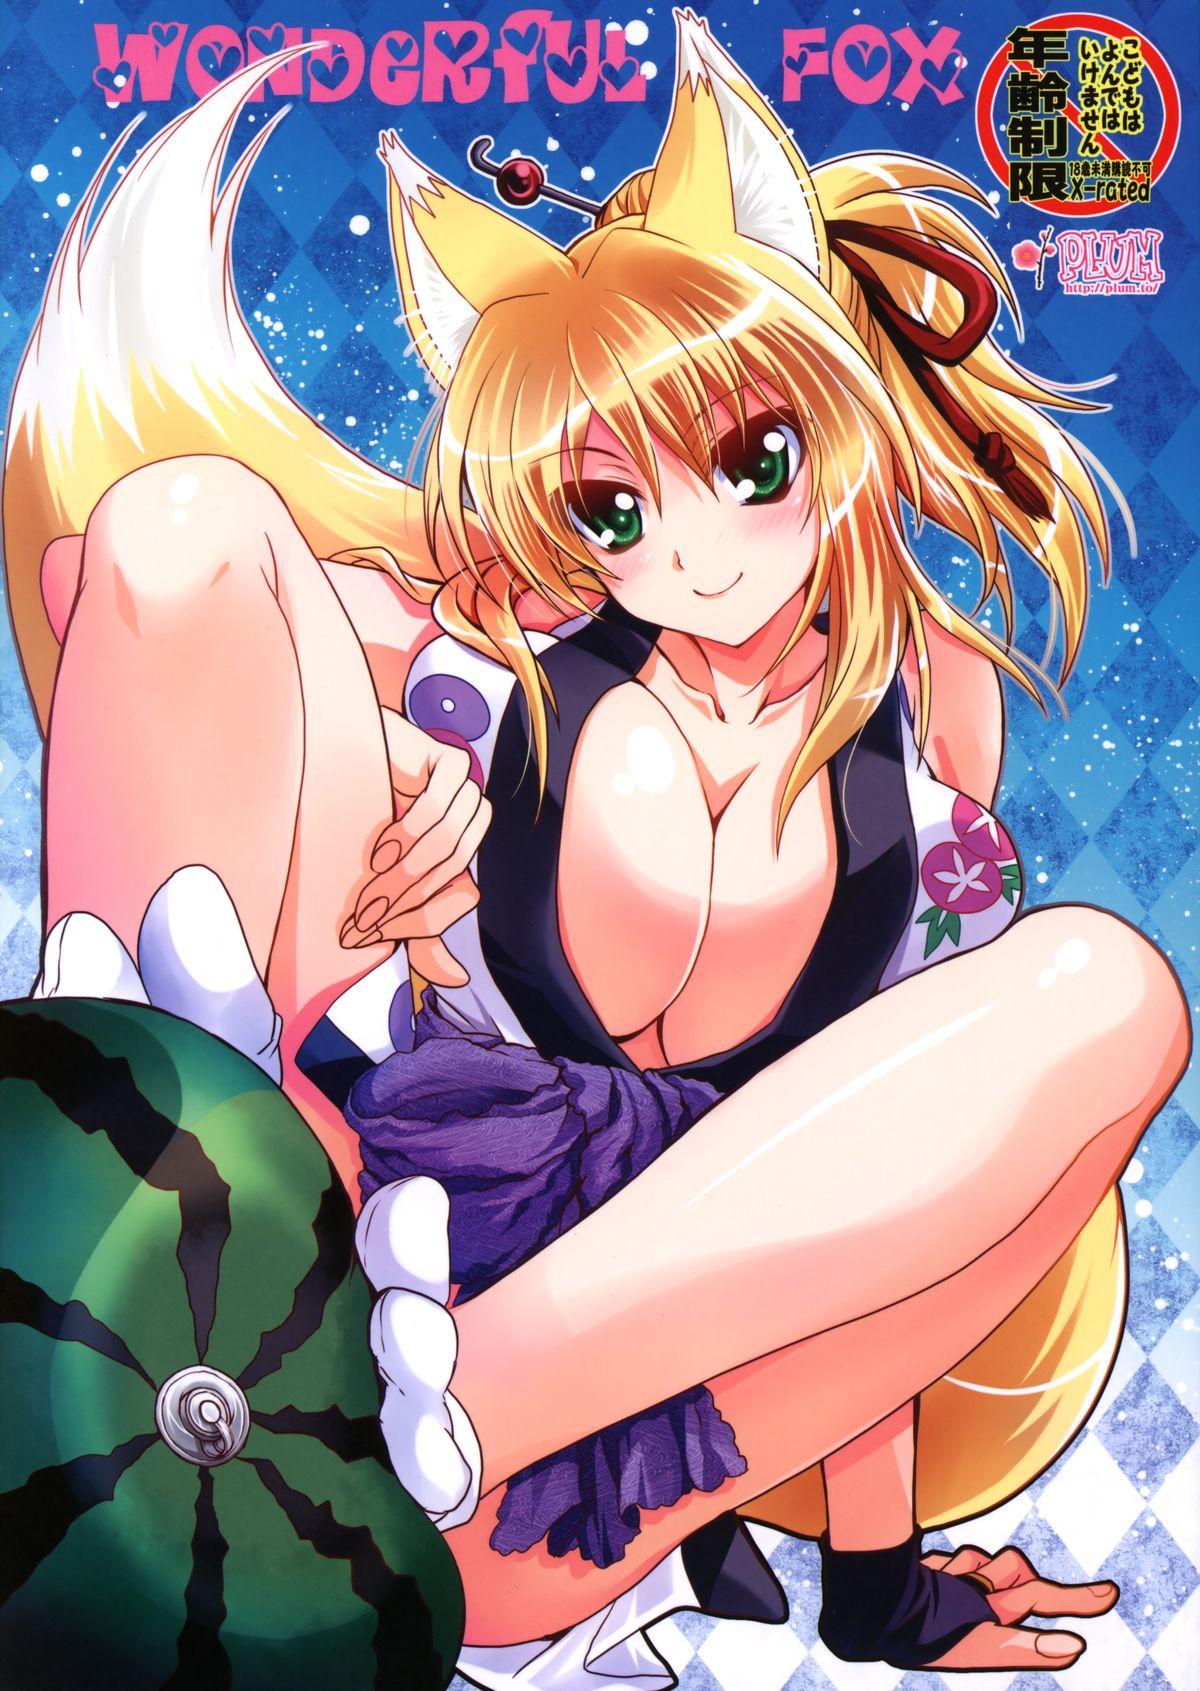 Indian Sex Wonderful Fox - Dog days Francaise - Page 1